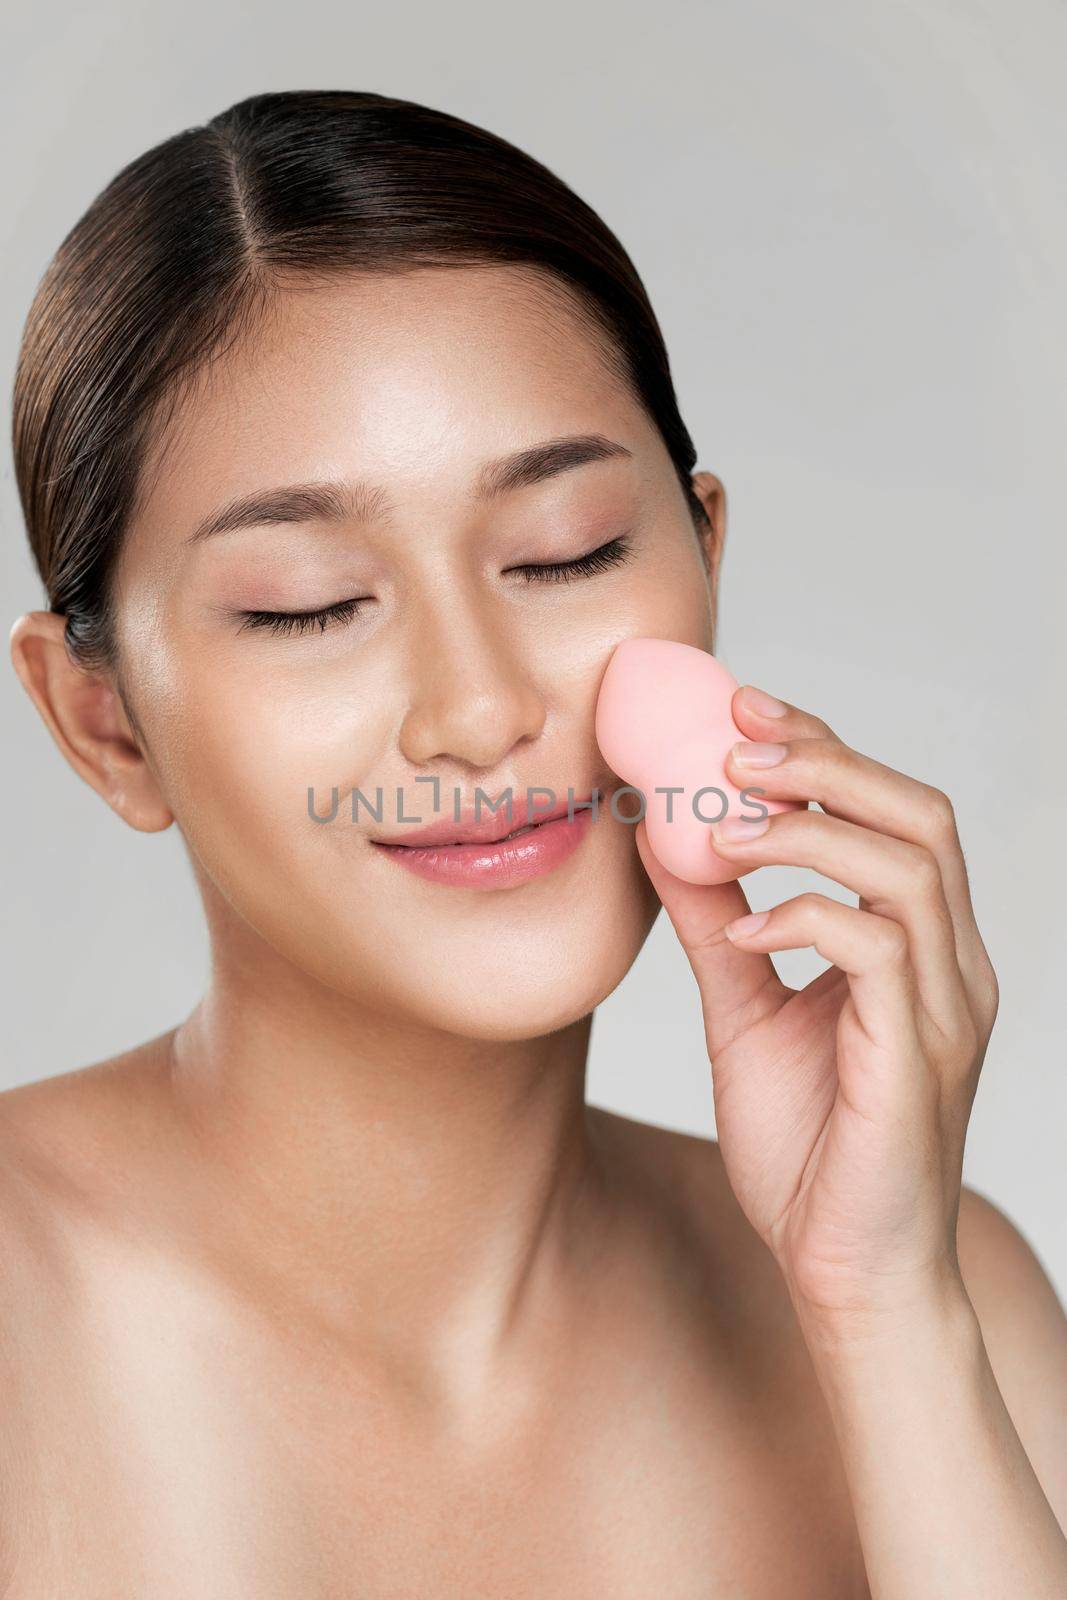 Closeup ardent woman applying her cheek with dry powder and looking at camera. Portrait of younger with perfect makeup and healthy skin concept.